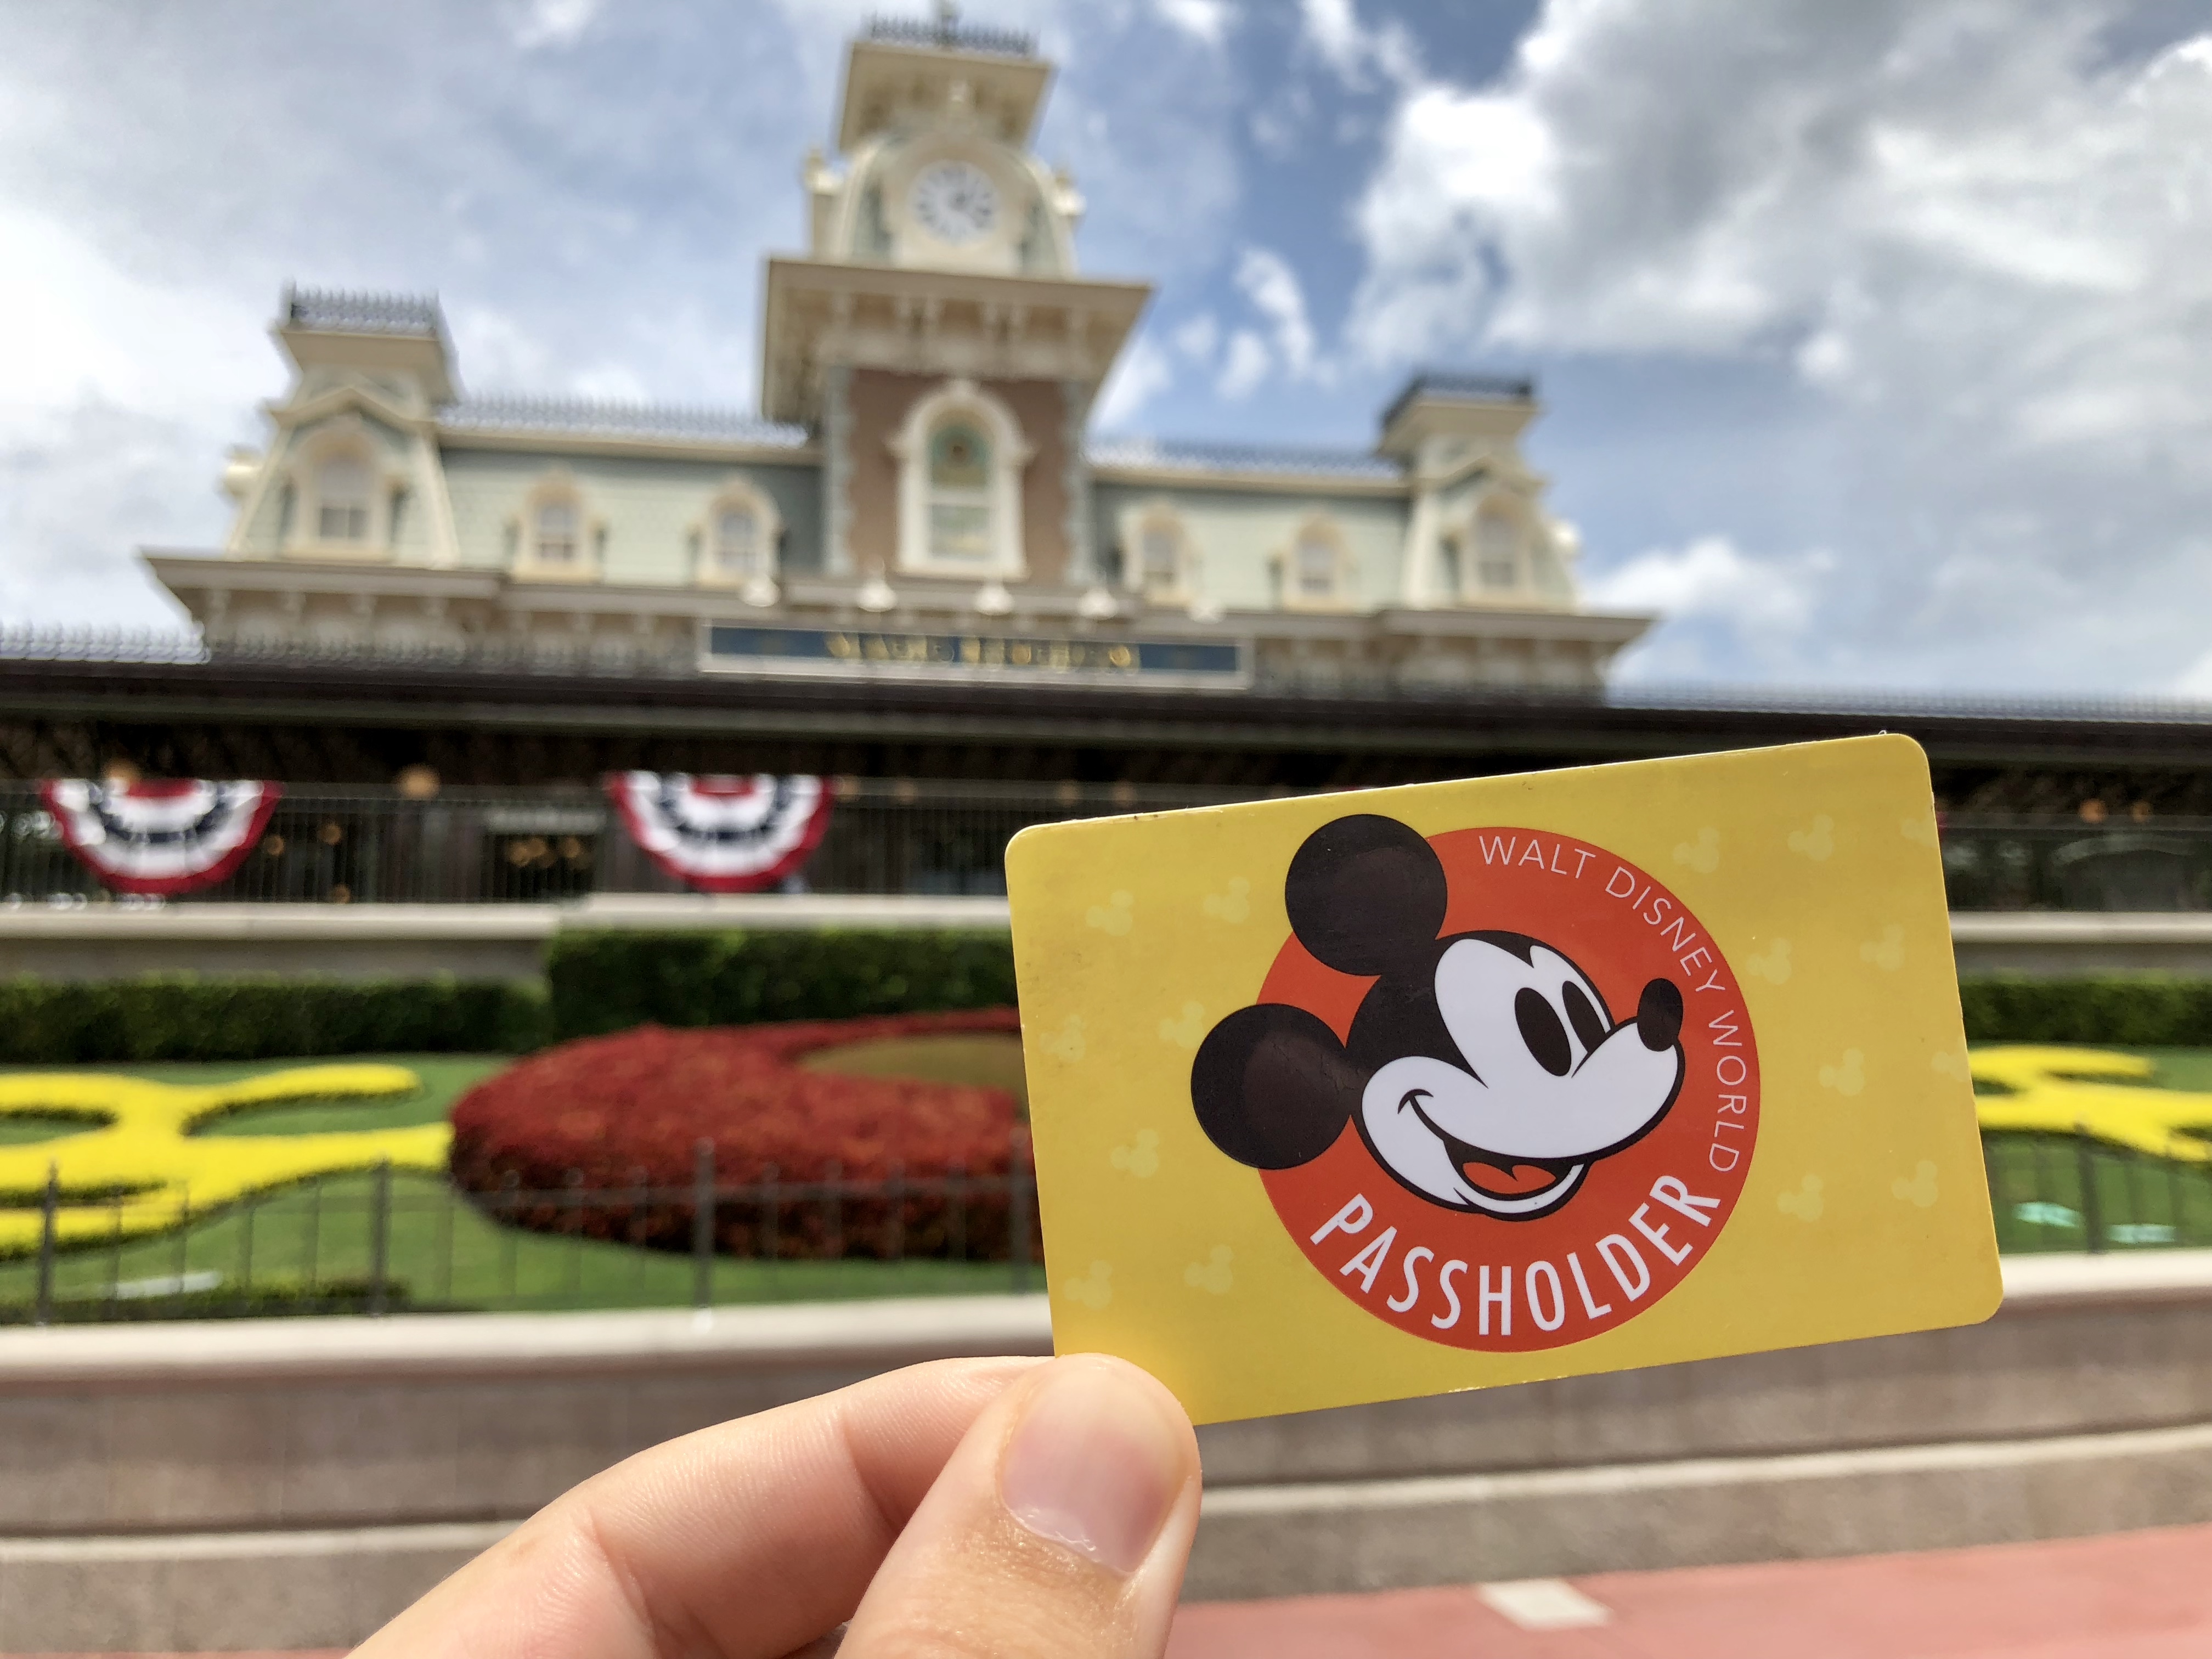 Disney Allows Annual Passholders to Cancel Passes in Light of